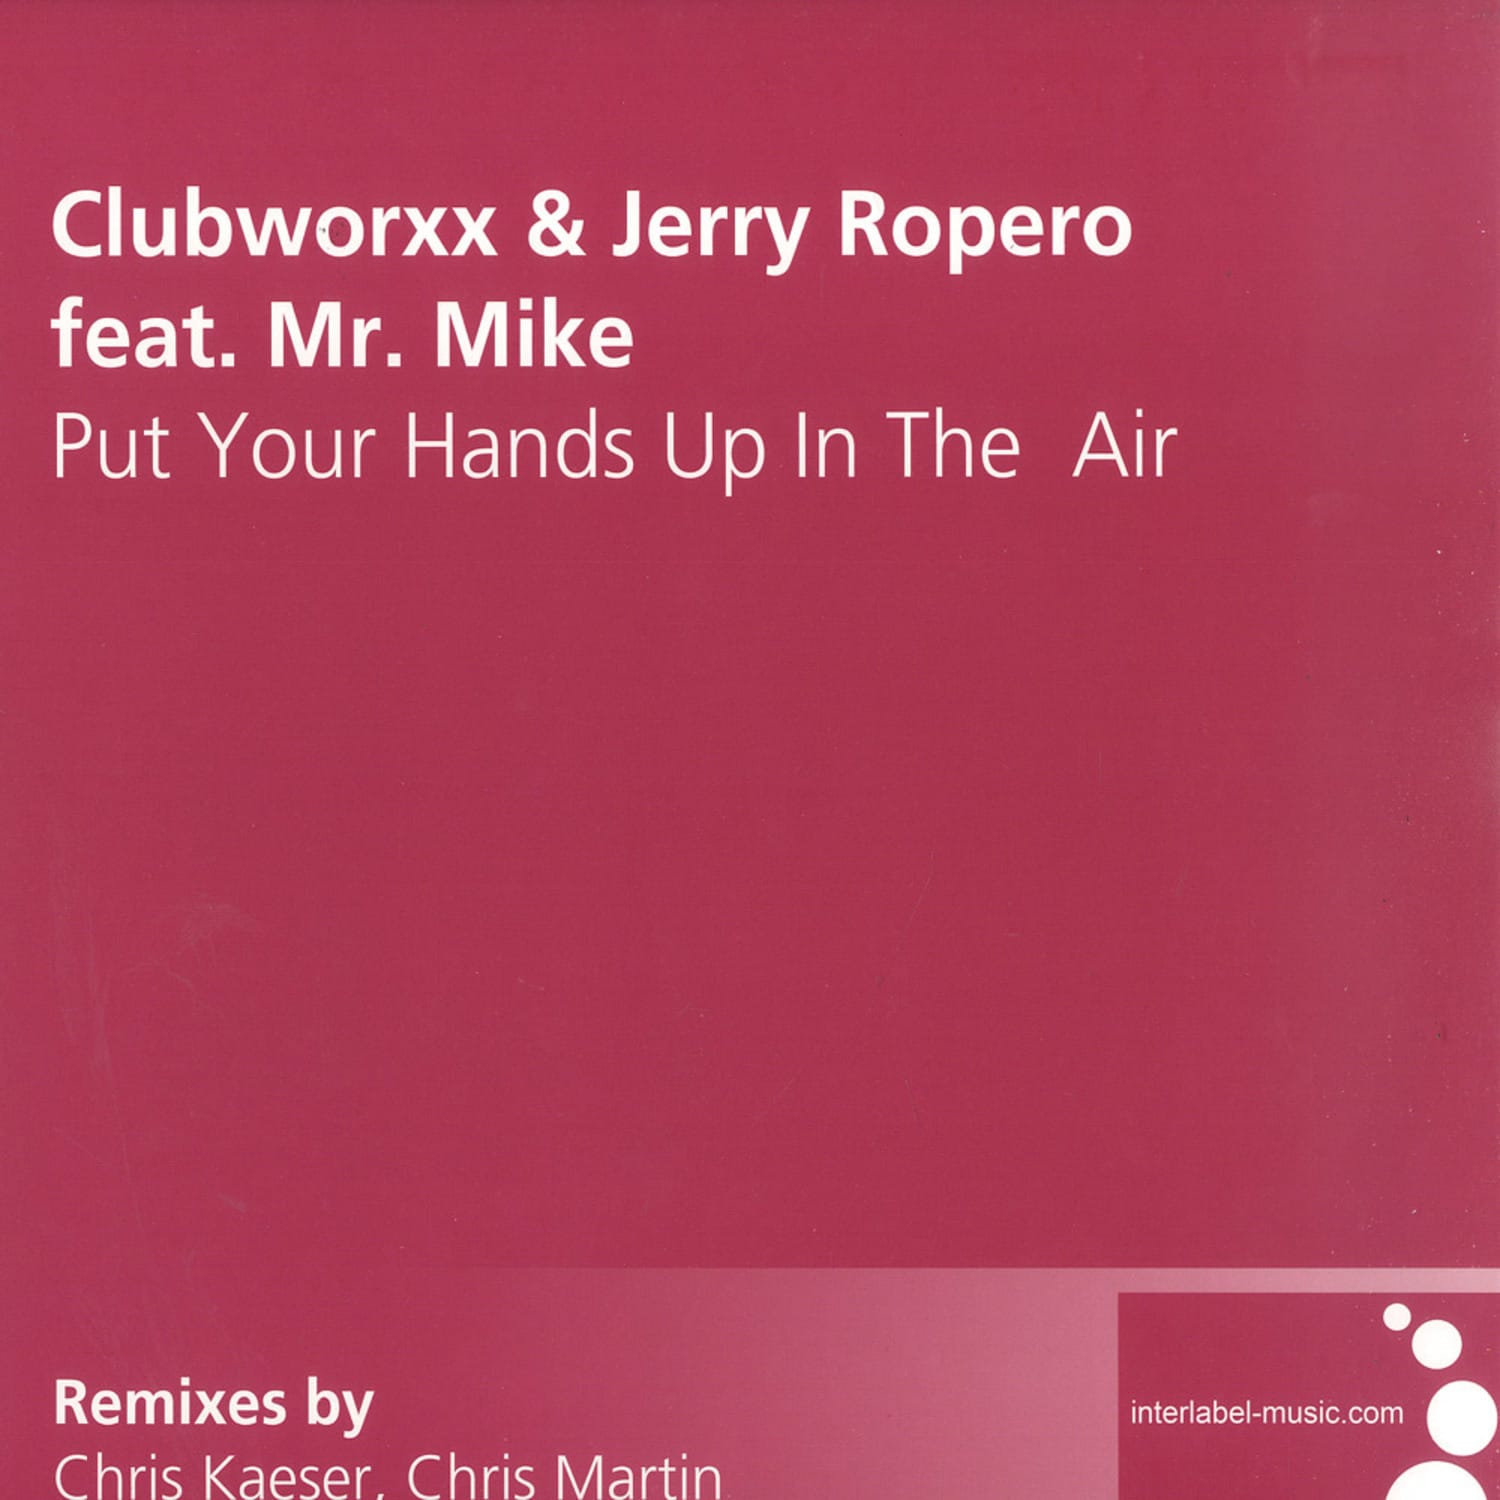 Clubworxx & Jerry Ropero feat. Mr. Mike - PUT YOUR HANDS UP IN THE AIR